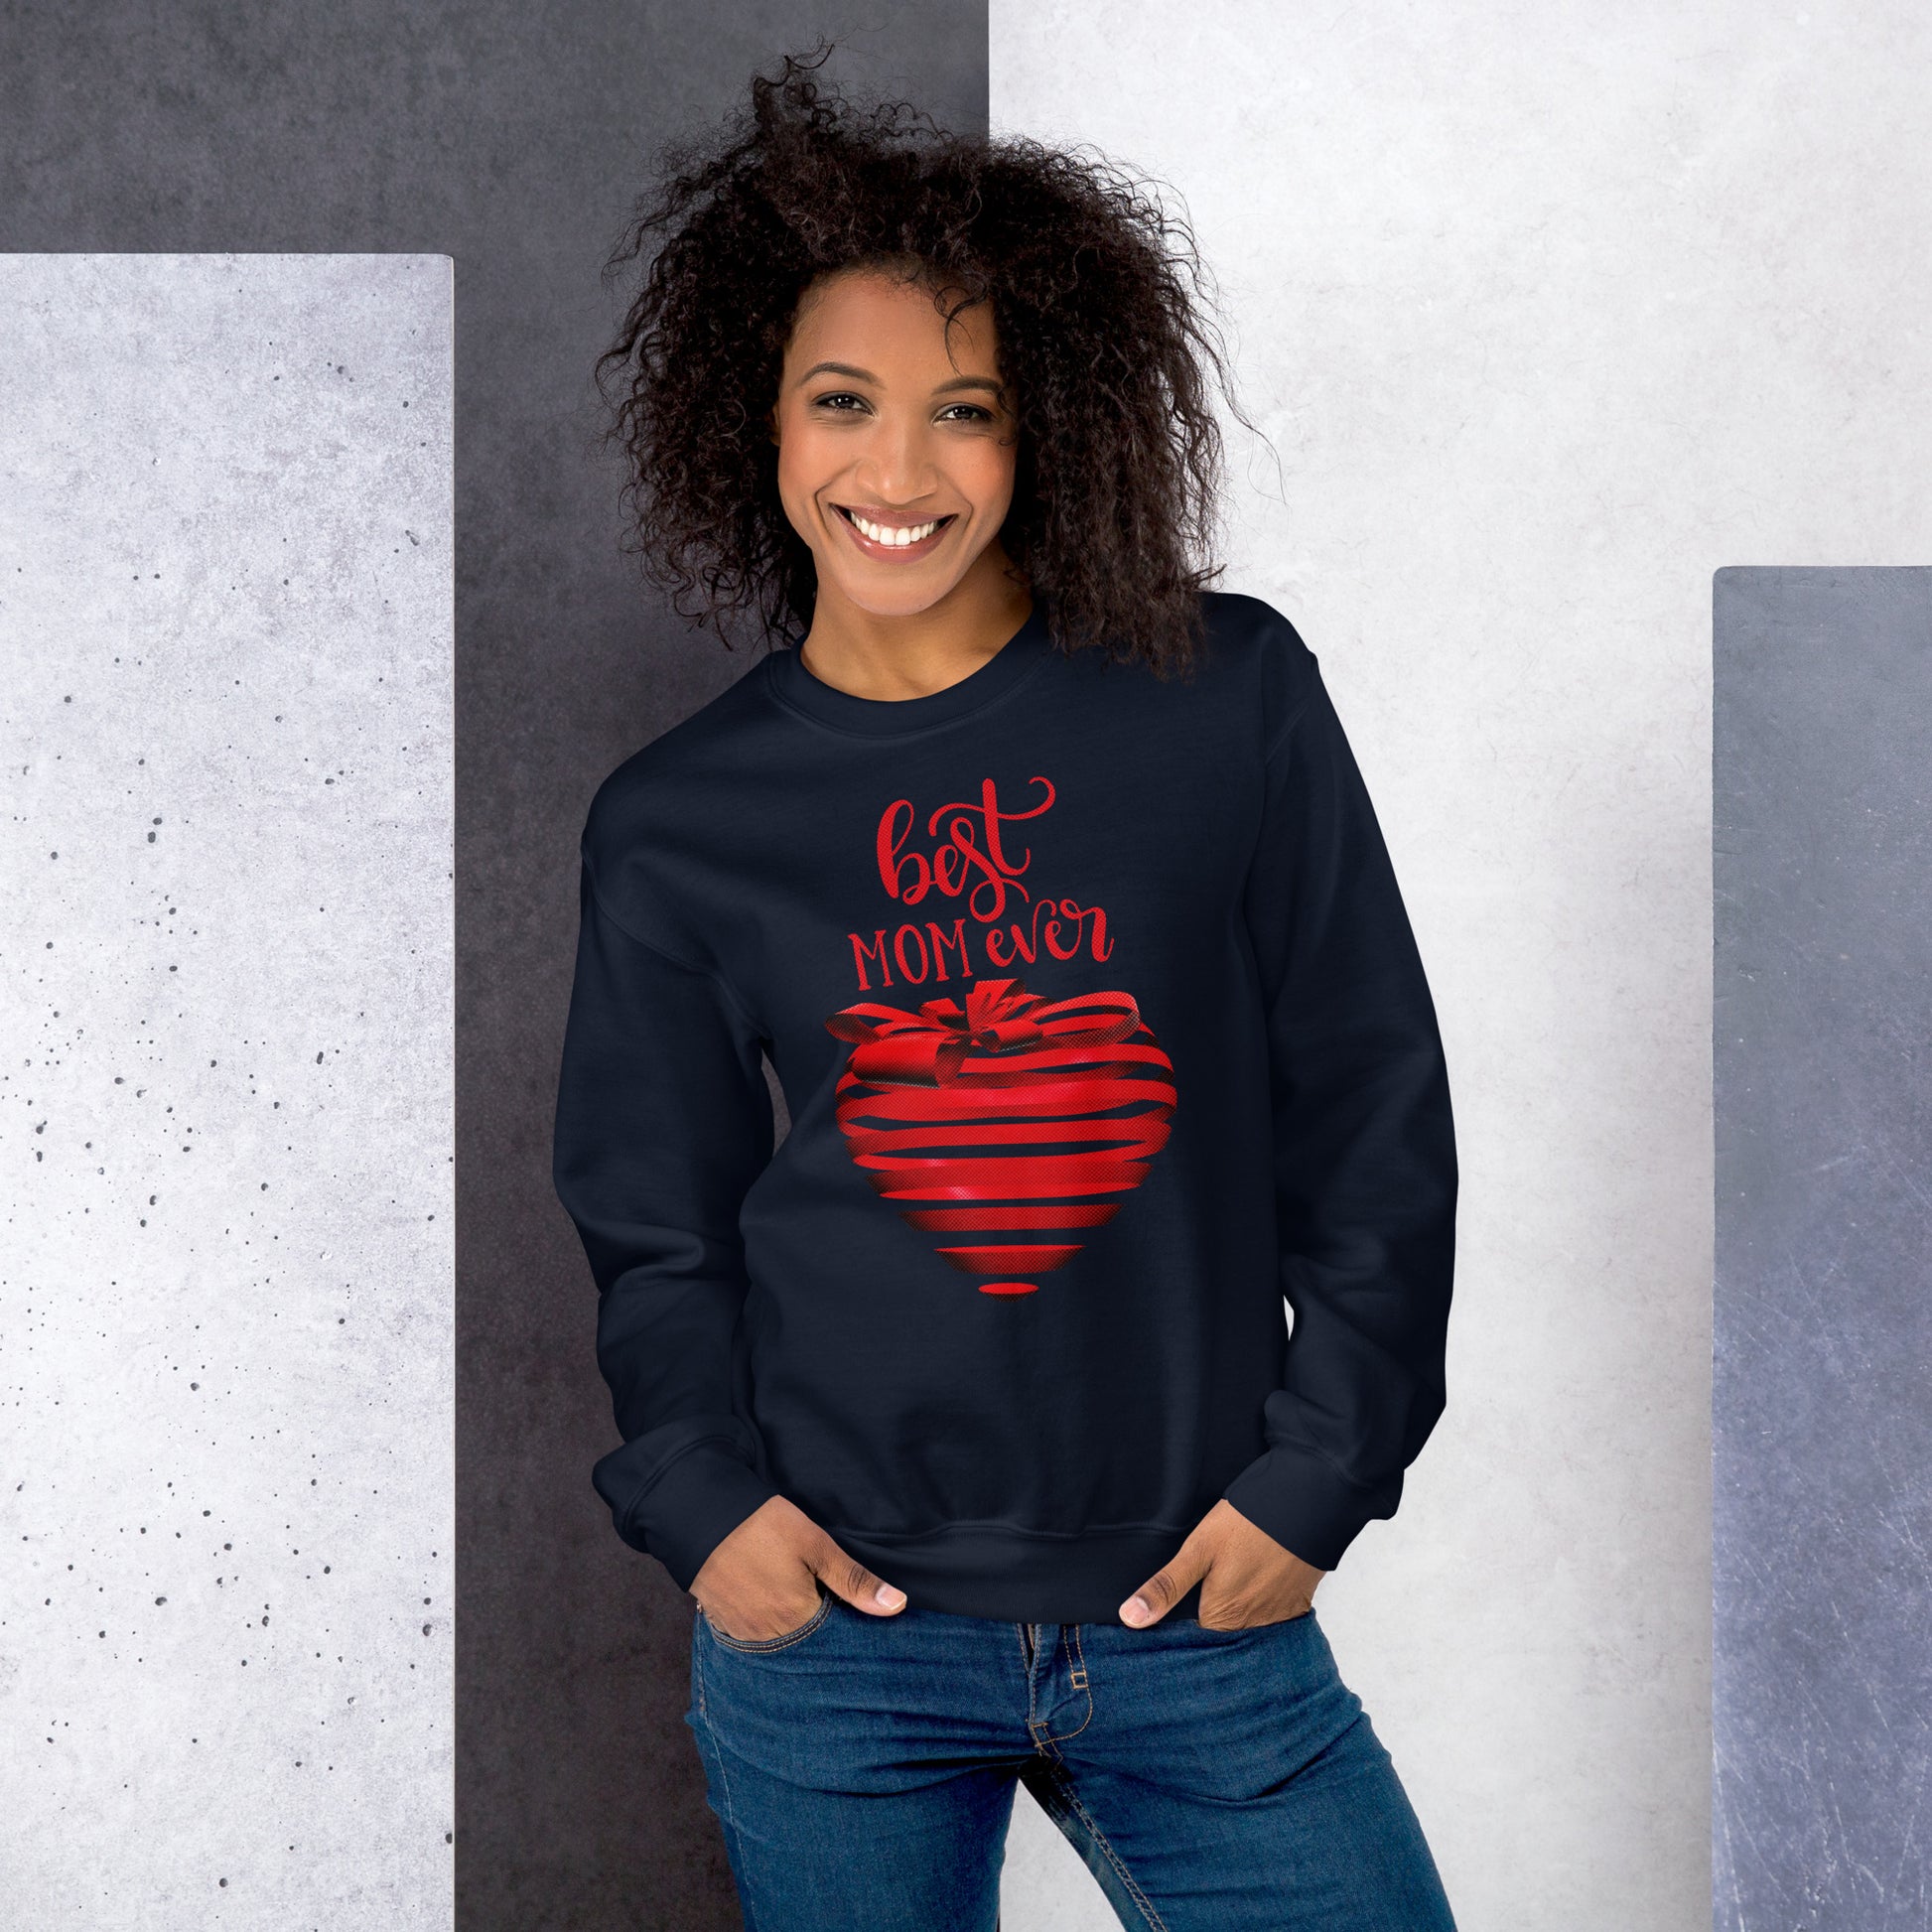 Women with navy sweater with red text best MOM Ever and red heart